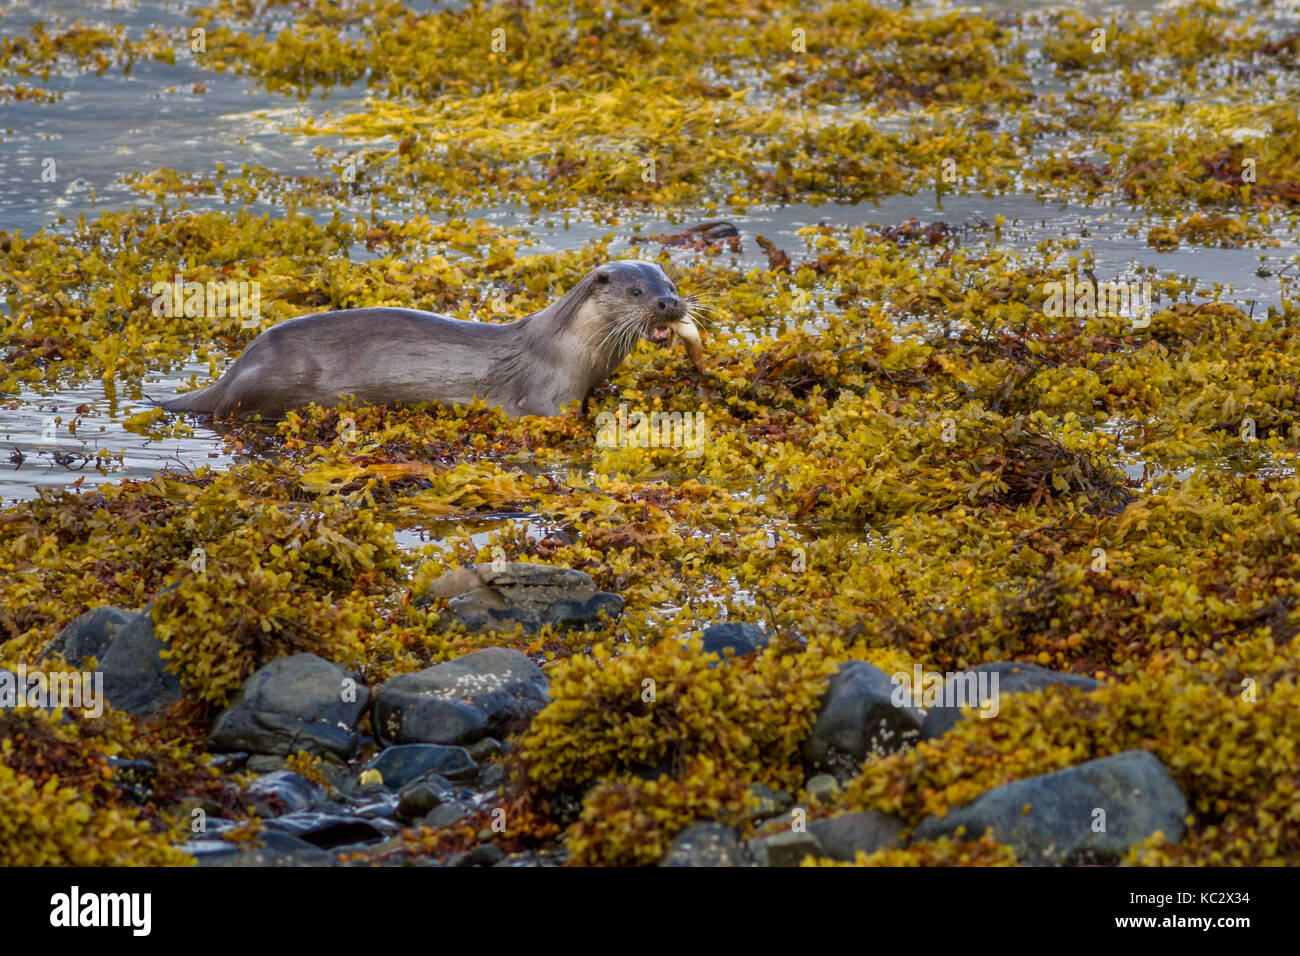 UK wildlife: Otter (lultra lultra) on land carrying fish it has caught out of the sea onto the seaweed shoreline, Isle of Mull, Scotland Stock Photo